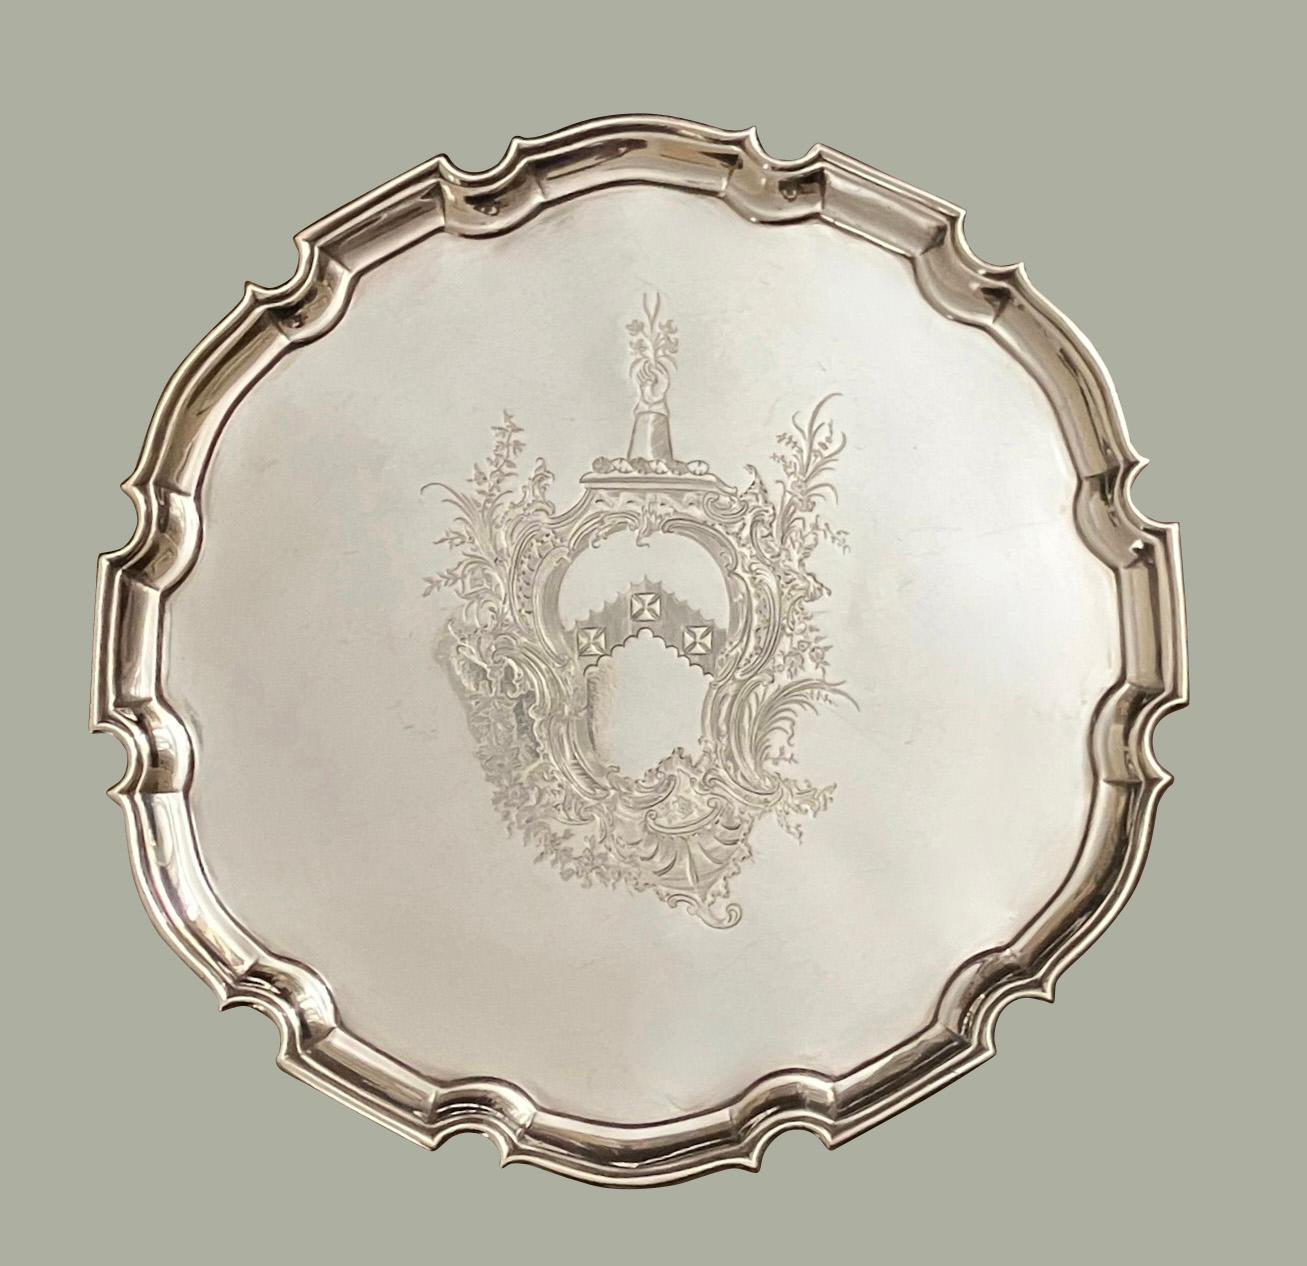 A good George II sterling silver salver of typical form with a pie crust edge, fully hallmarked for London 1734 and made by Edward Pocock. Weight 653 grams. The piece bears a finely engraved untraced contemporary armorial.
Salvers were typically